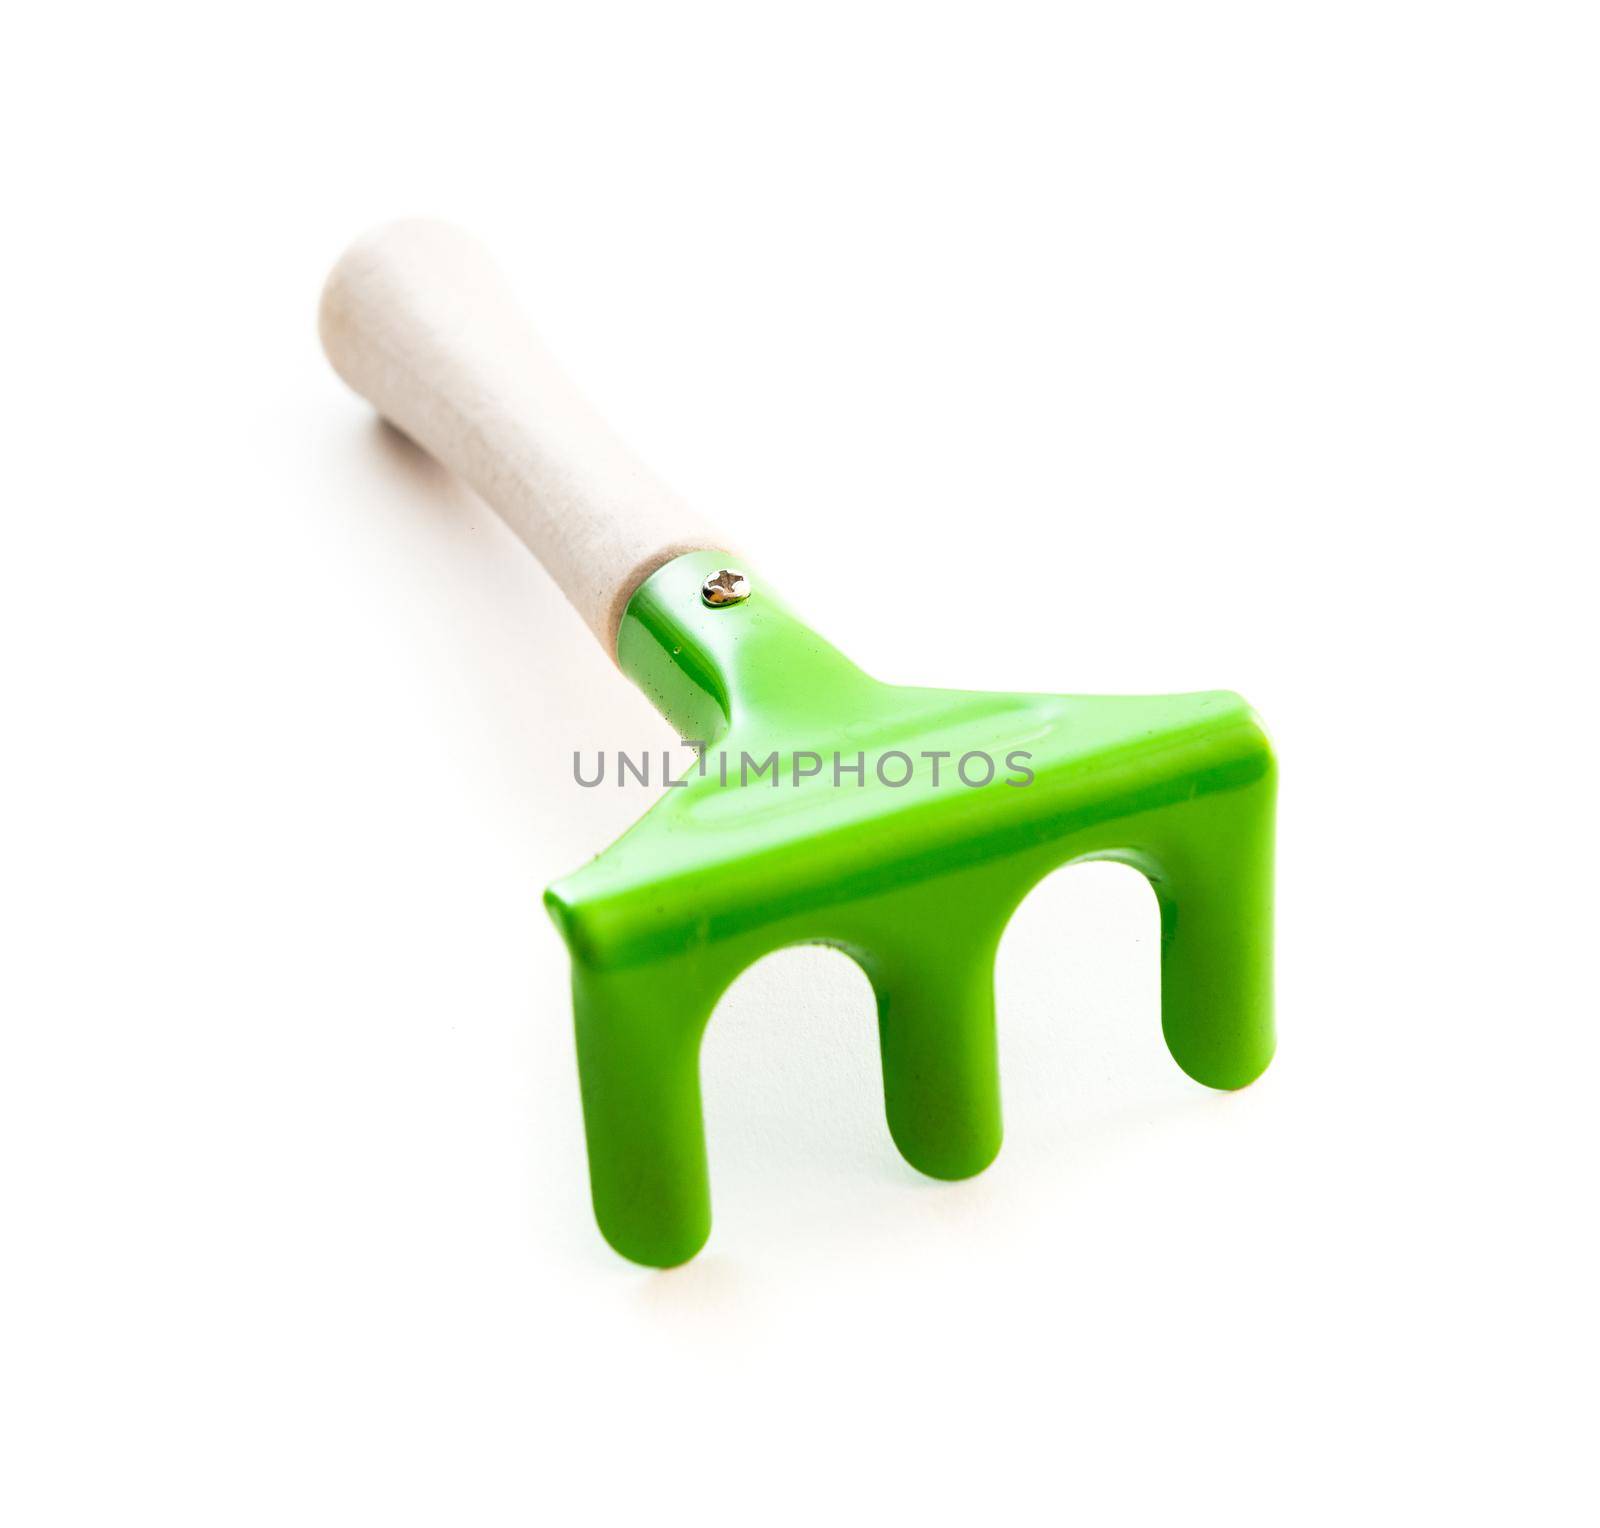 green garden rake is isolated on a white background